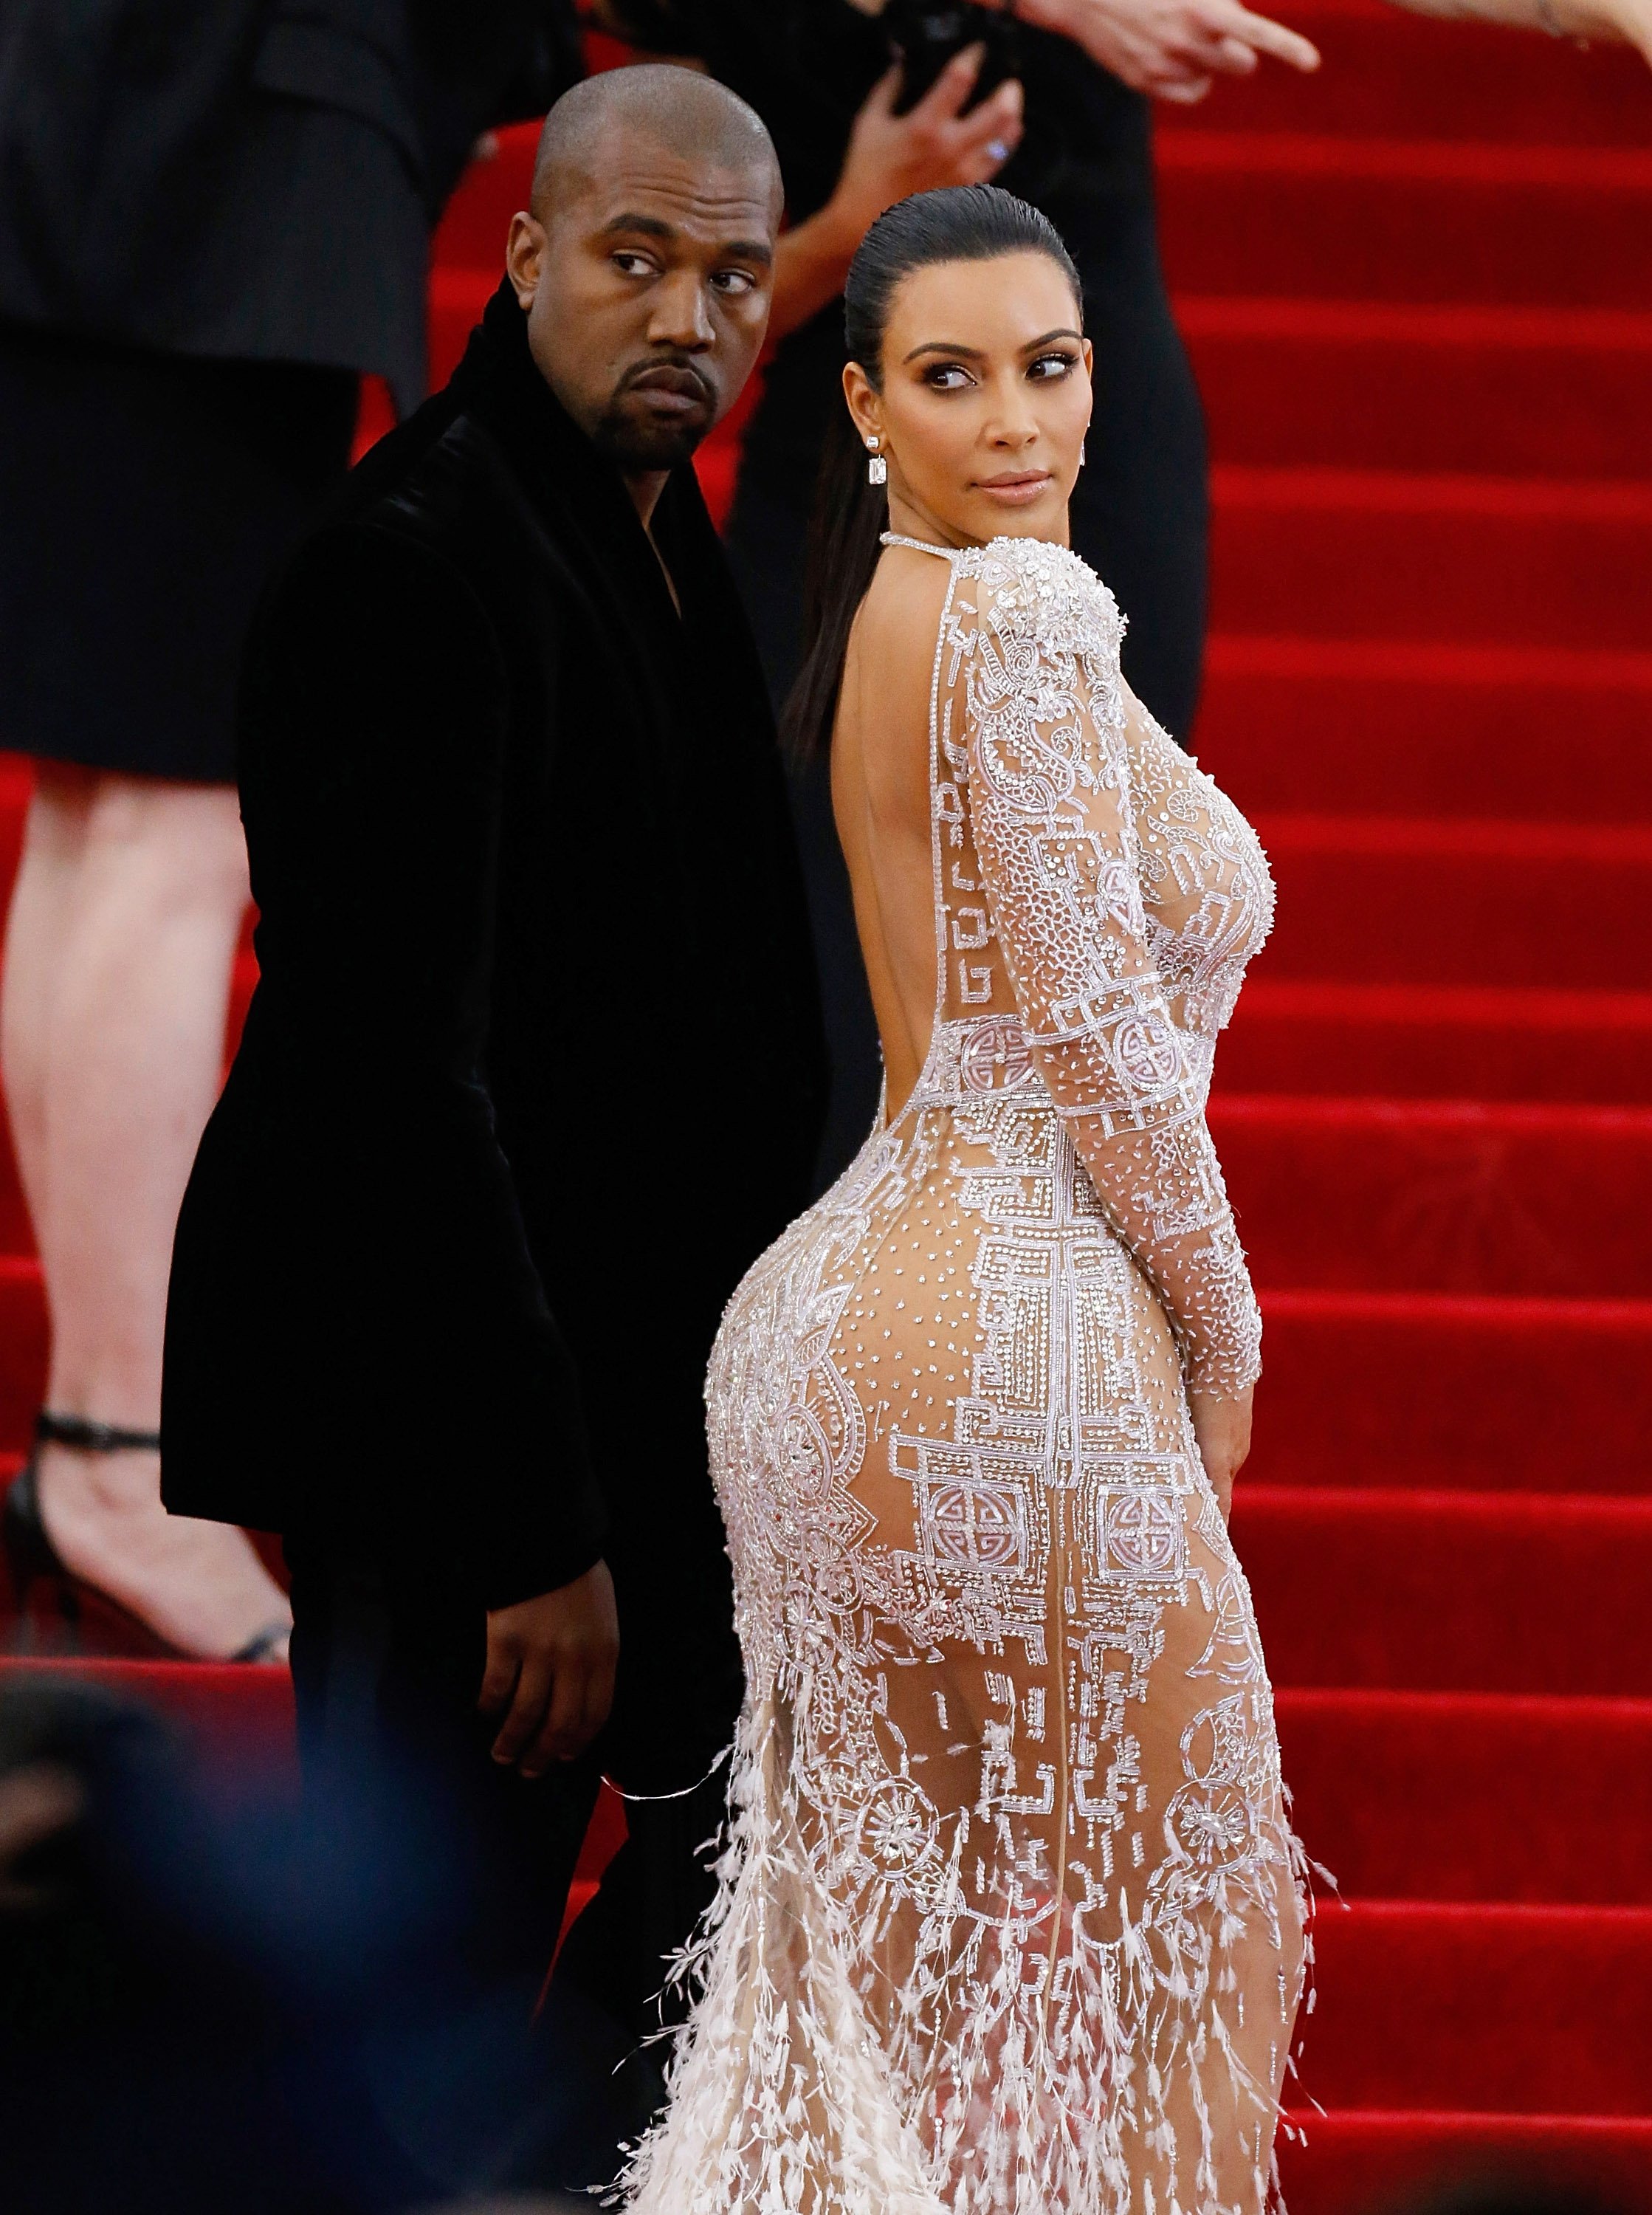 Kanye West & Kim Kardashian at the Met Gala on May 4, 2015 in New York City | Photo: Getty Images